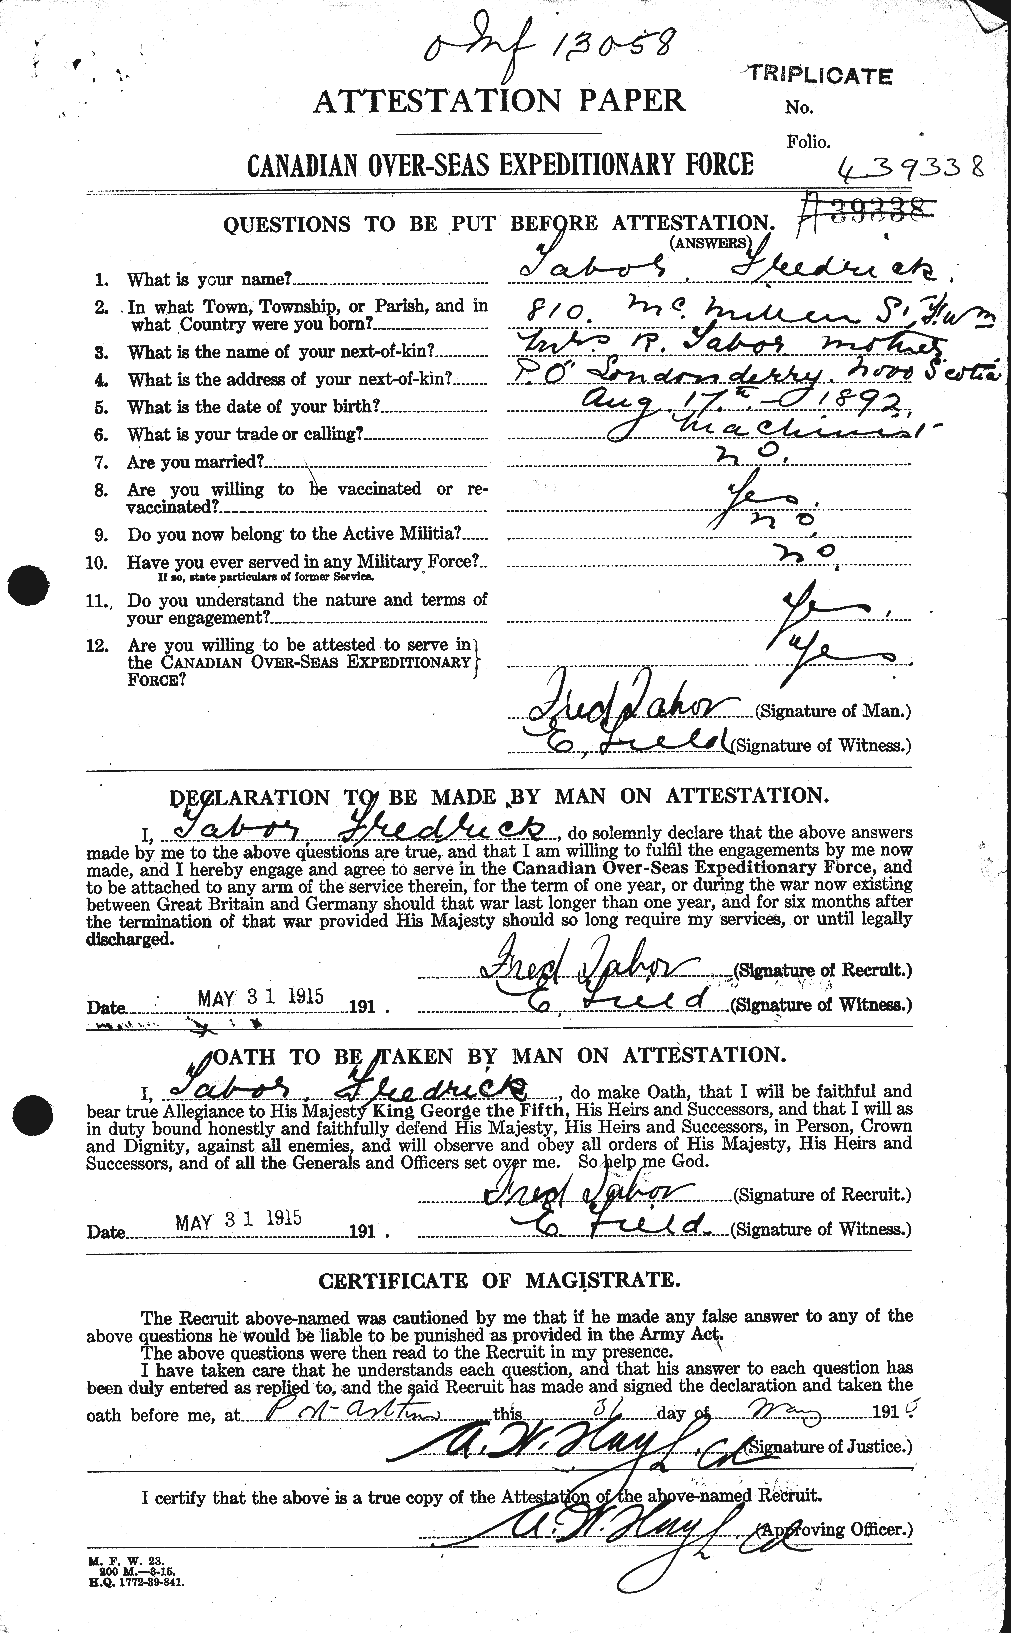 Personnel Records of the First World War - CEF 127987a